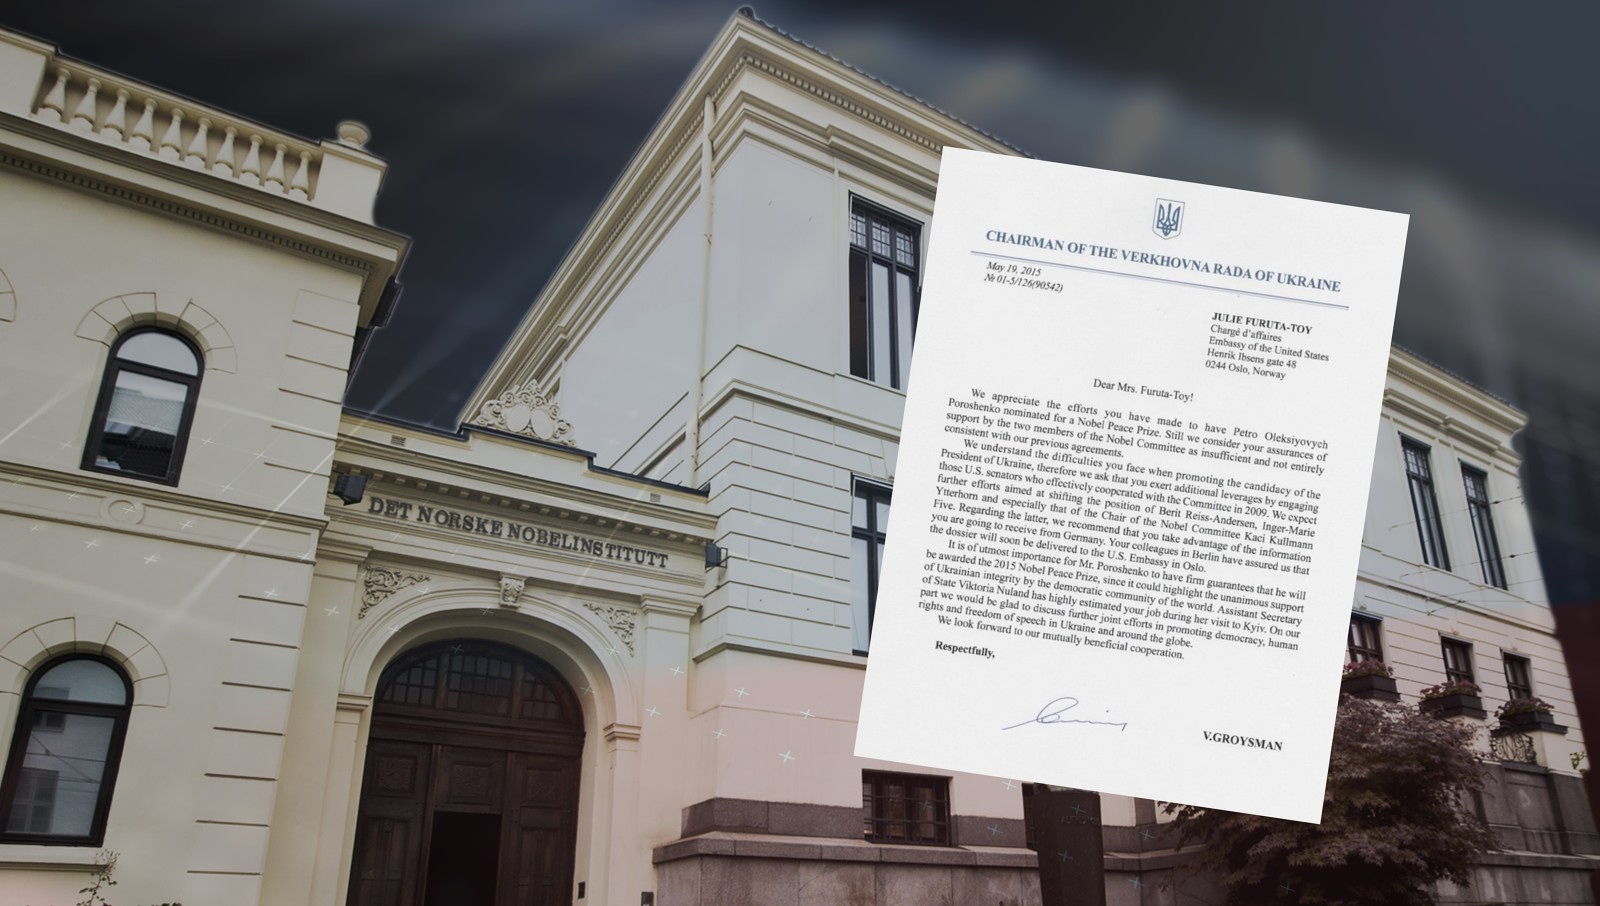 This letter fabricated by the Russian spy services was intended to incriminate the USA and Ukraine in manipulating decisions of the Nobel Committee, if Ukrainian President Petro Poroshenko won the Nobel Peace Prize in 2015, according to Norwegian investigators (Image: NRK.no)